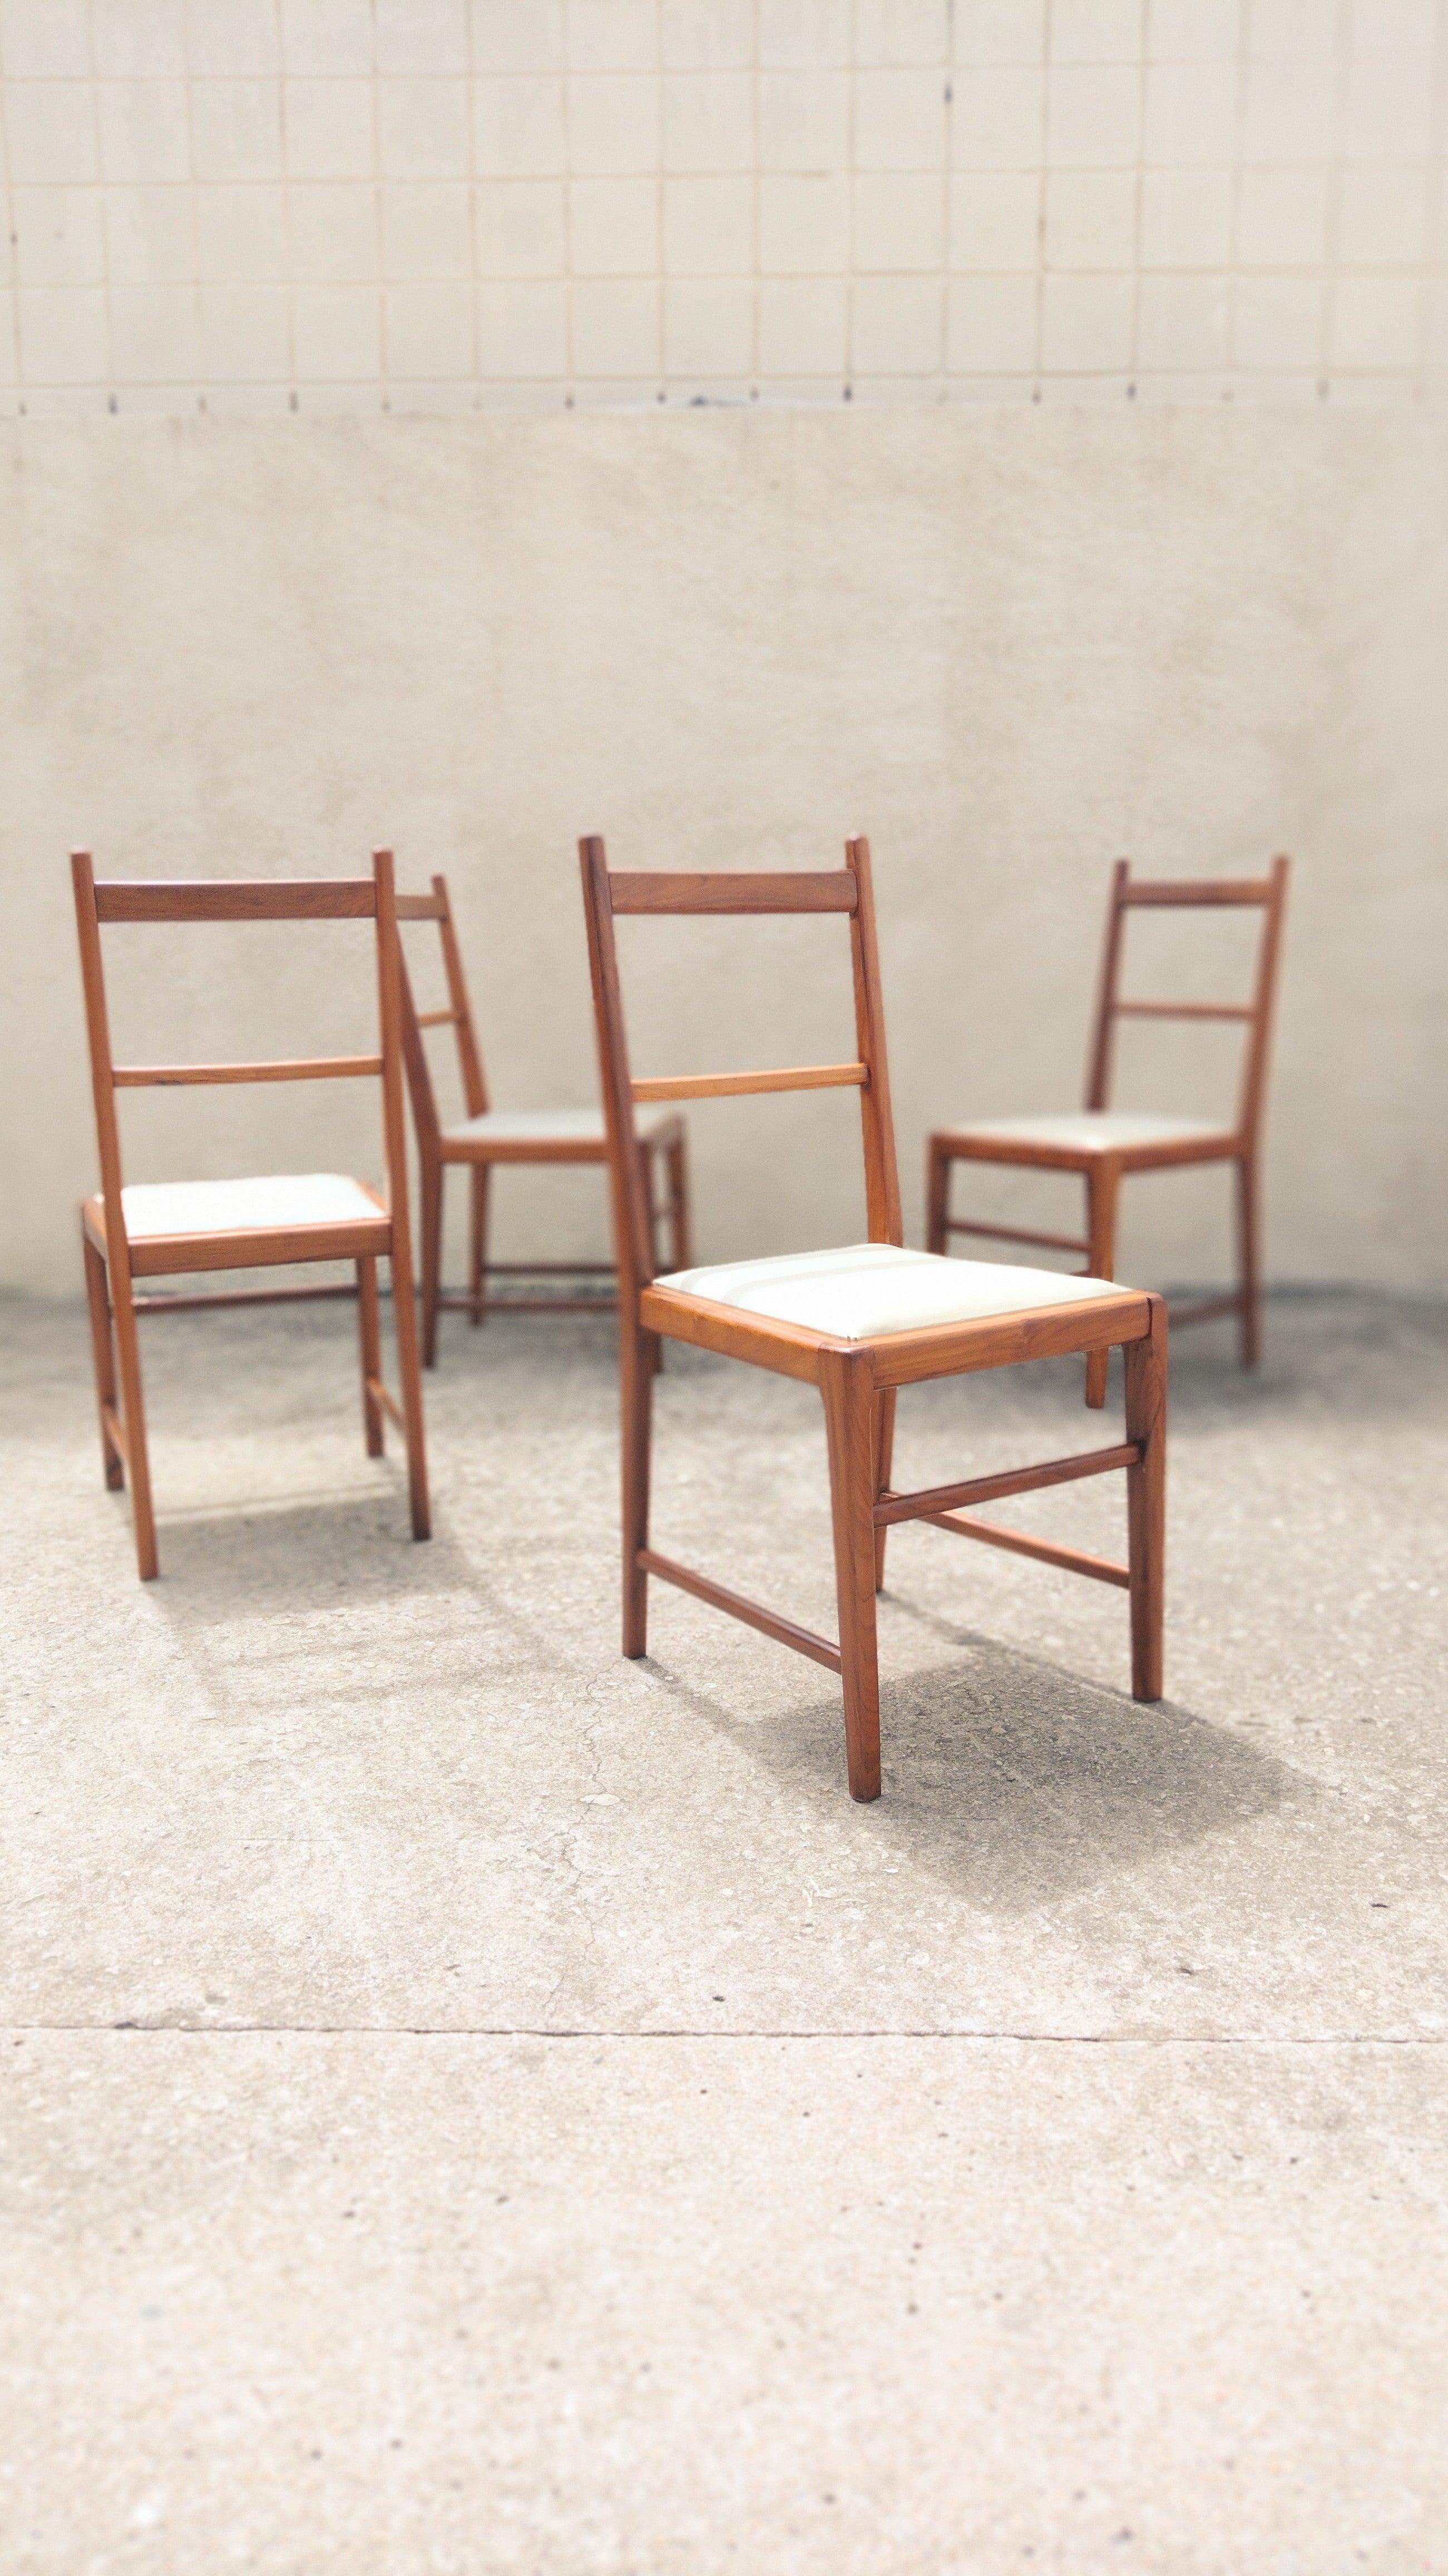 Set of 4 modern Brazilian in Solid Caviuna and Courvin chairs from the 60's. In good condition.

Approximate Measures:

Height: 95cm / Width: 43cm / Depth: 47cm
Seat Height: 46cm

Main wear details:

-Wooden structure presents discreet surface